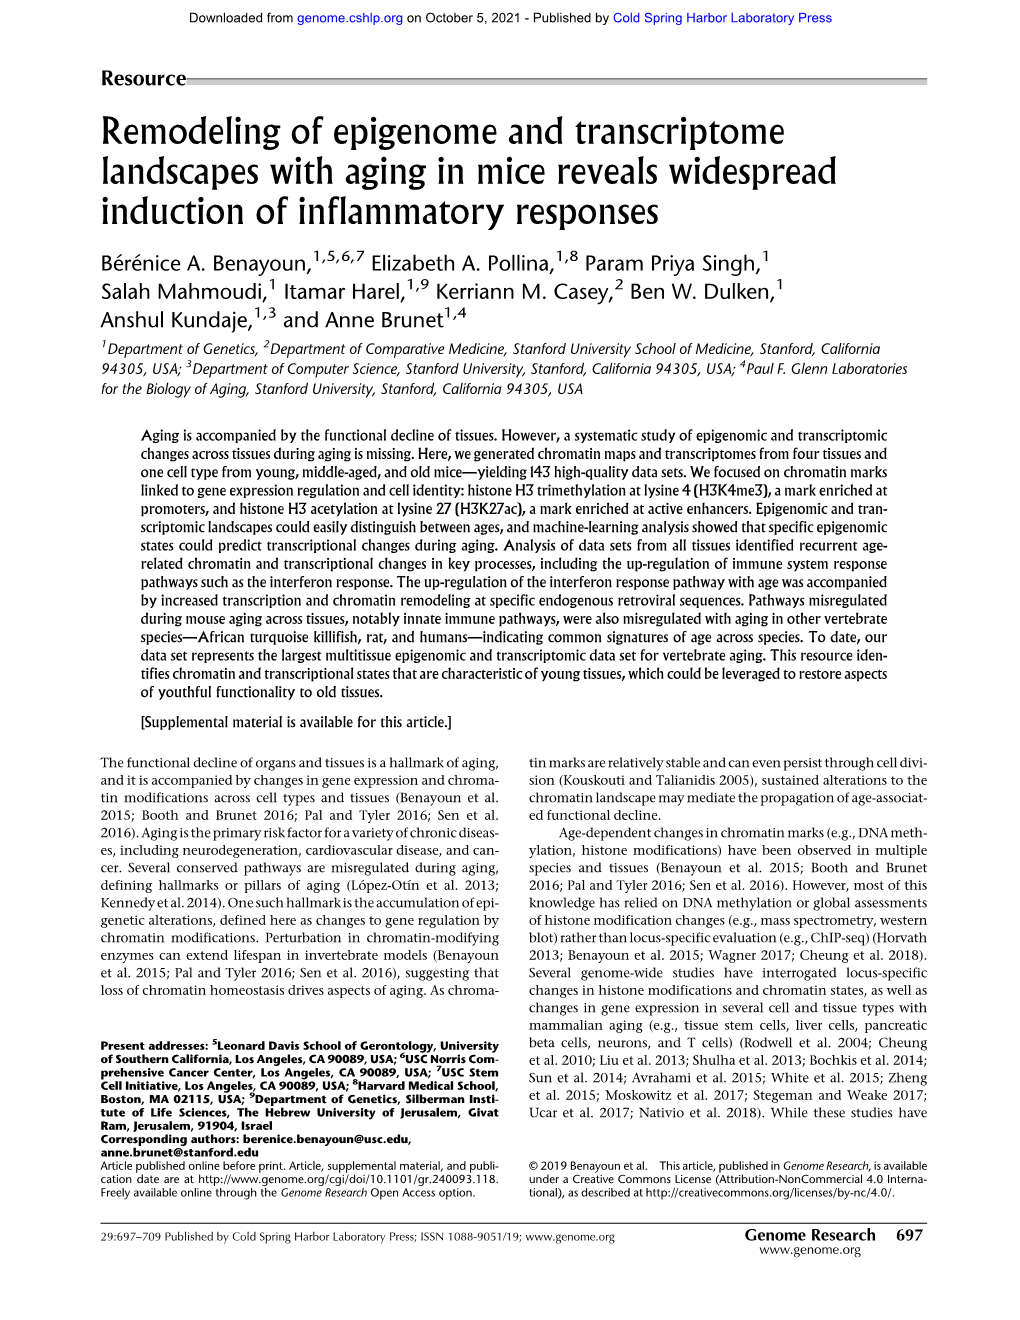 Remodeling of Epigenome and Transcriptome Landscapes with Aging in Mice Reveals Widespread Induction of Inflammatory Responses